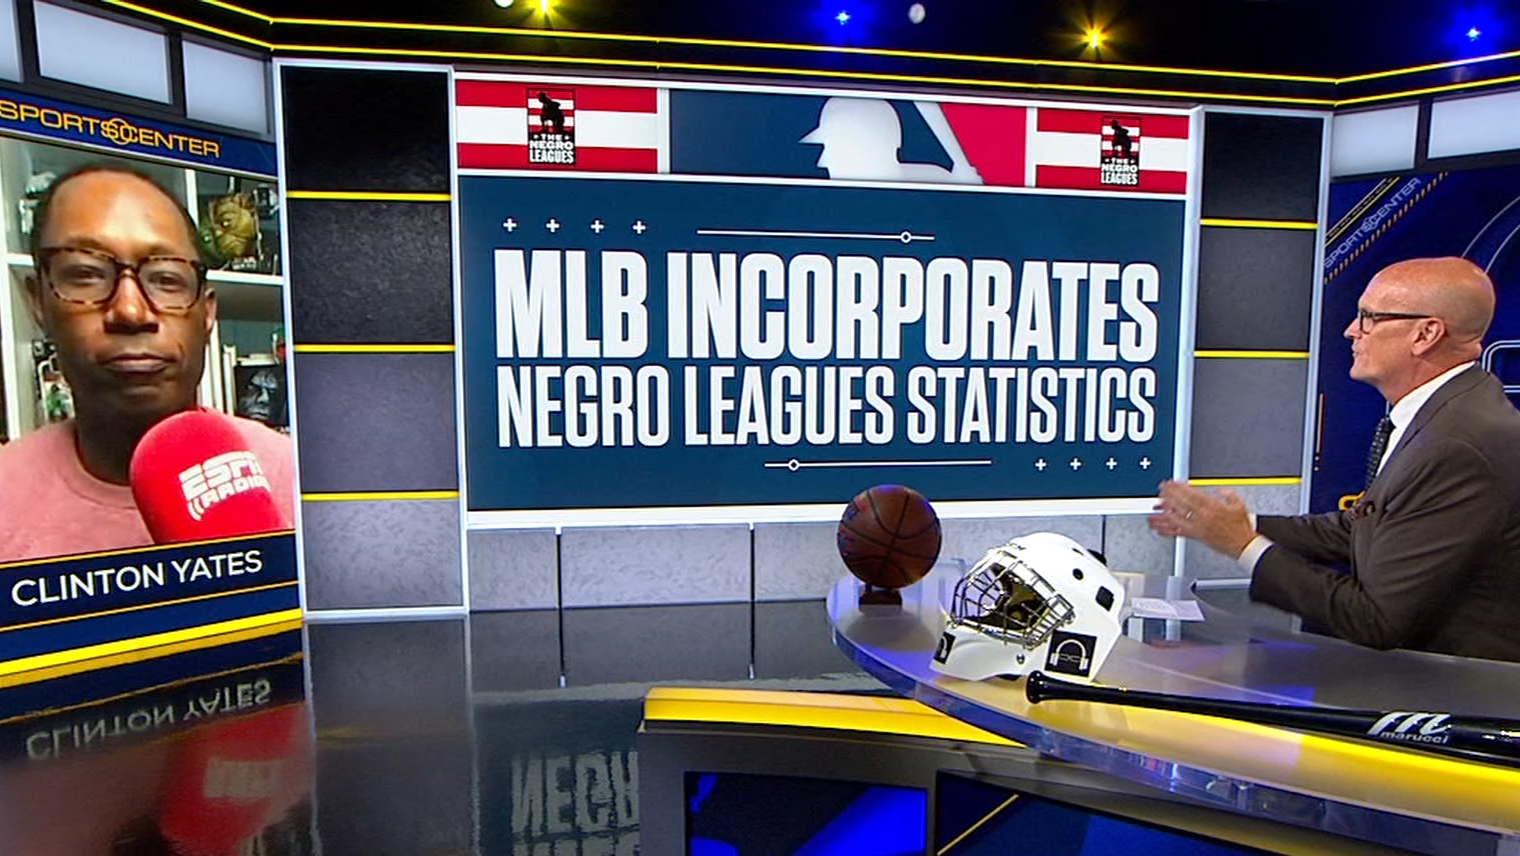 Clinton Yates: MLB incorporating Negro League stats is 'a work in progress'